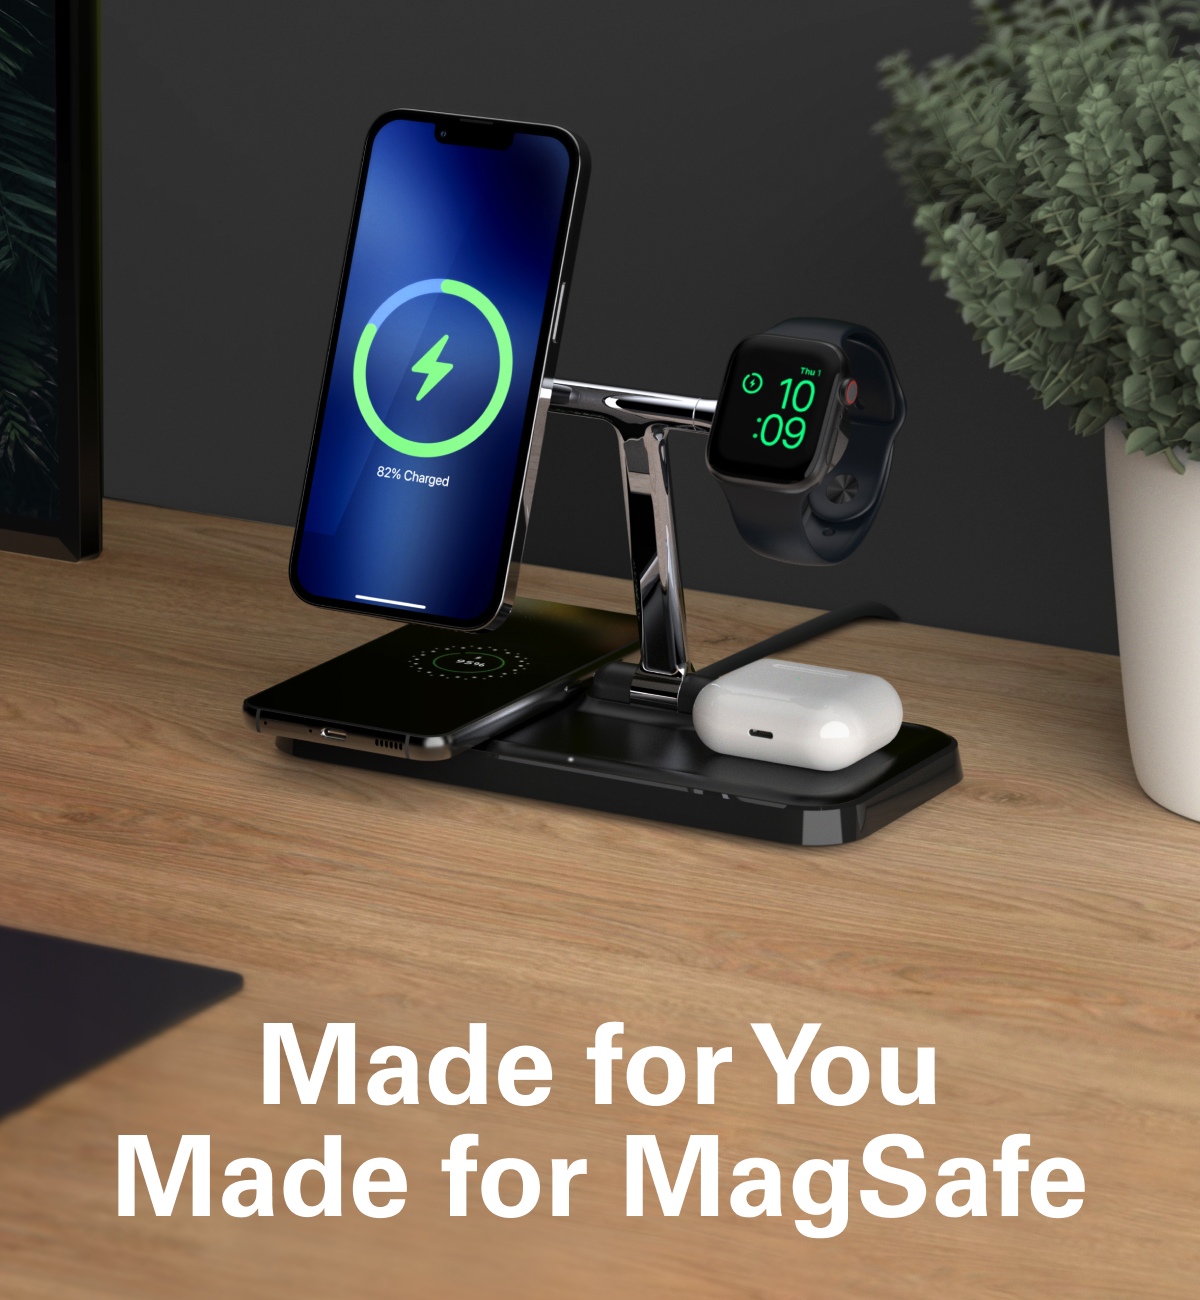 HyperJuice 4-in-1 Wireless Charger With MagSafe